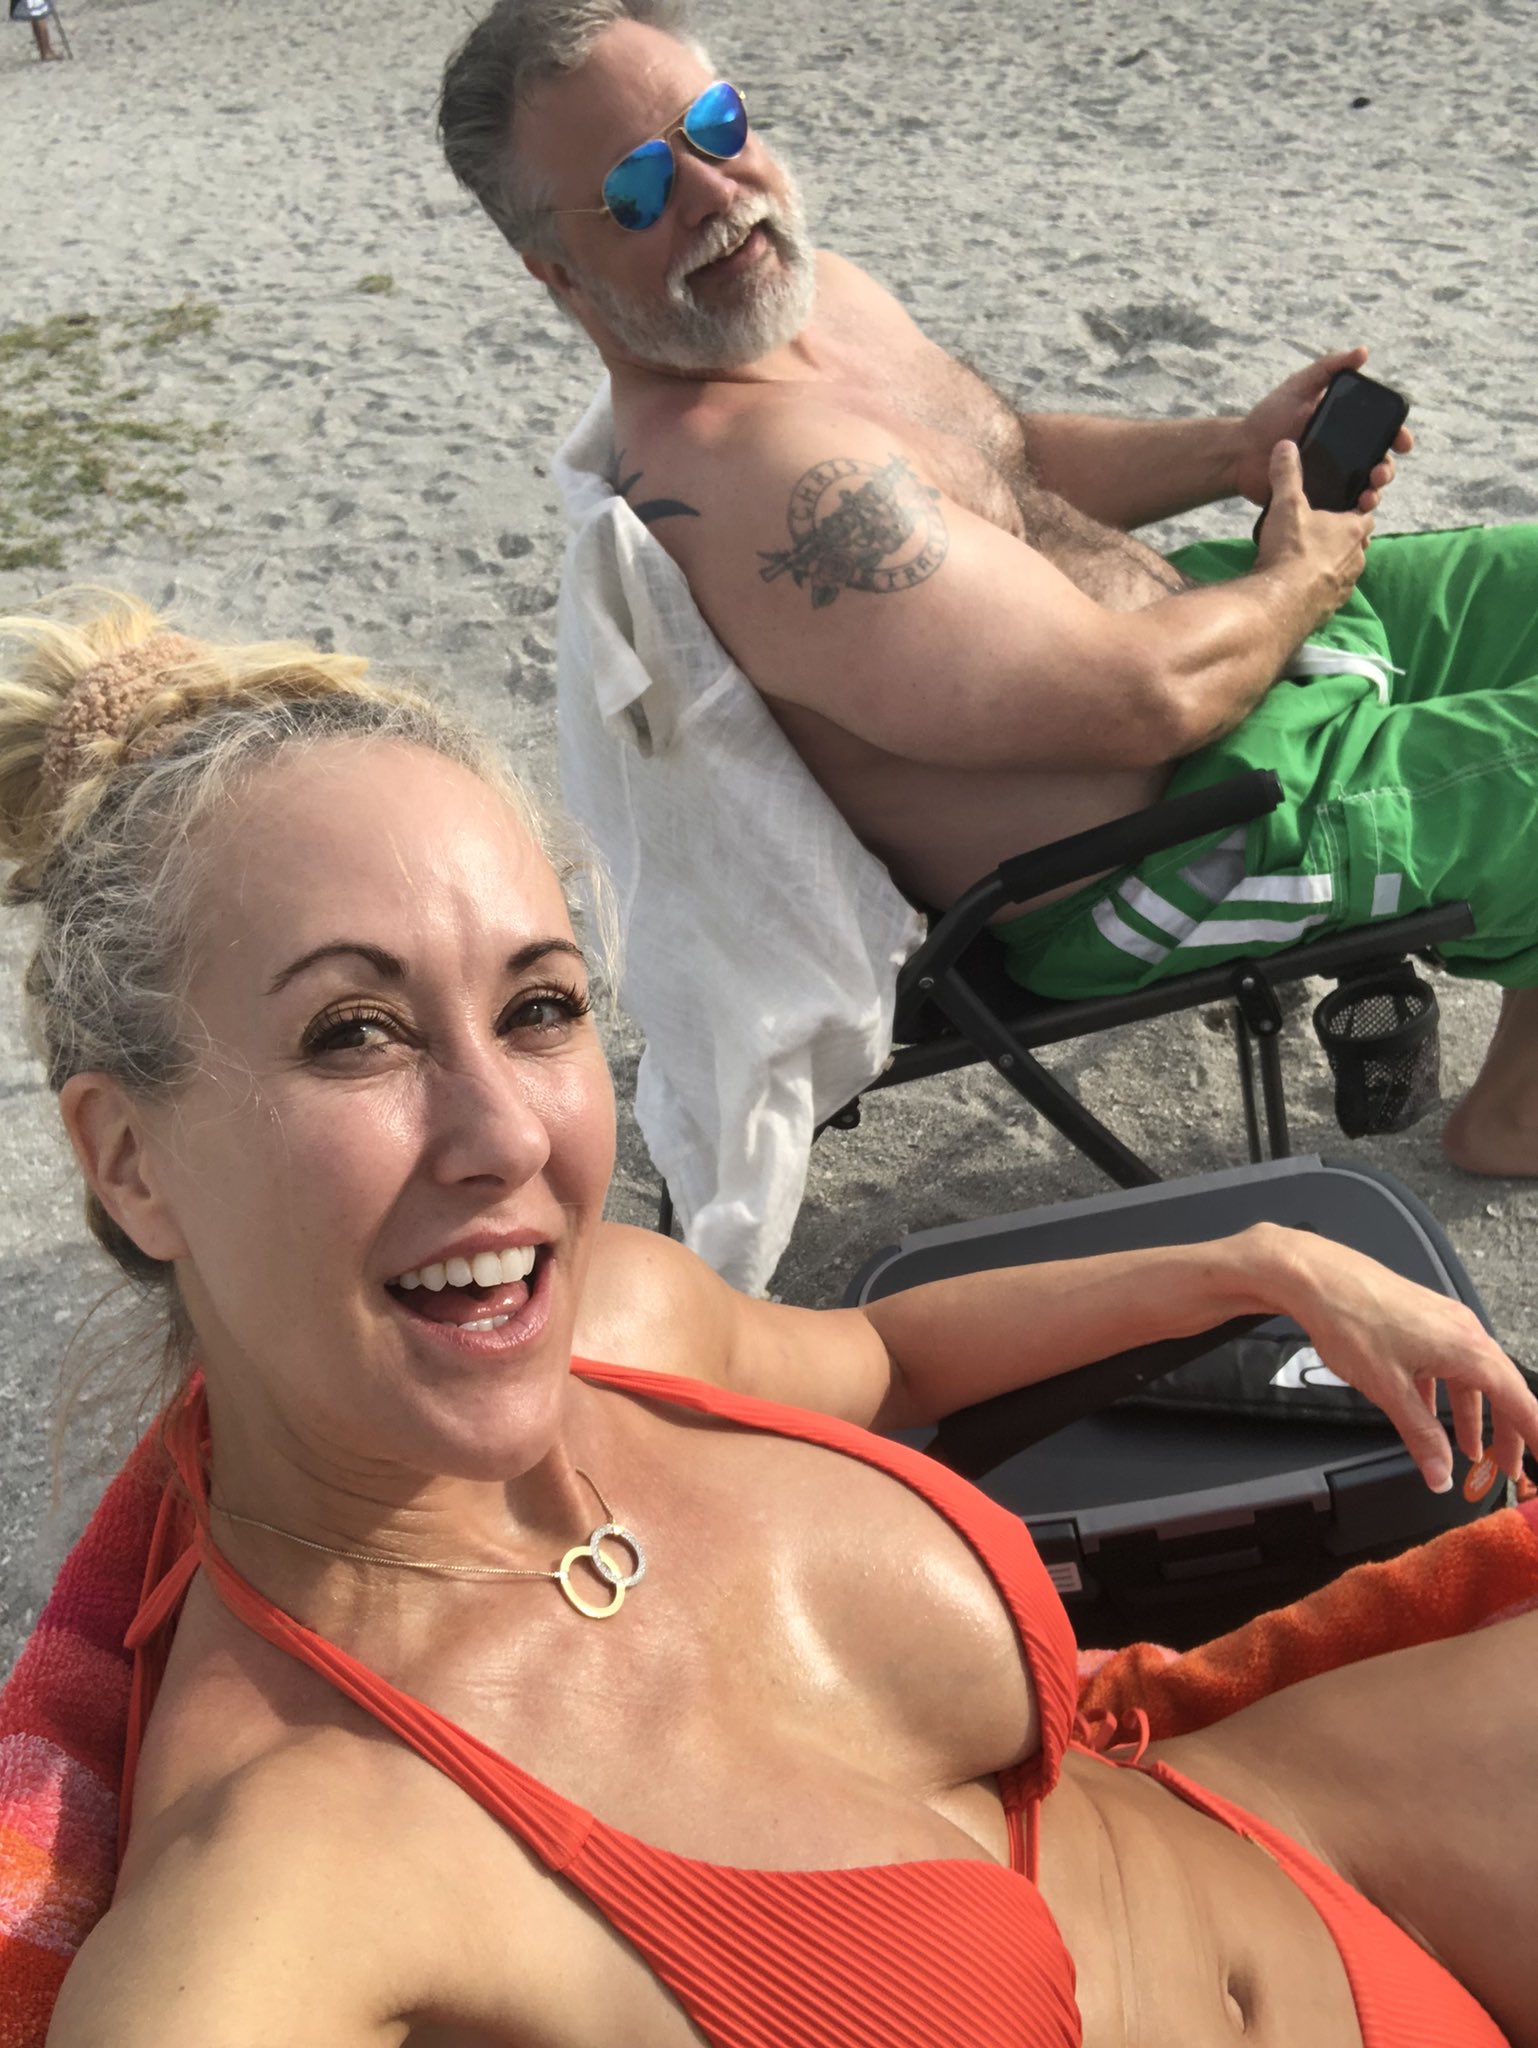 TW Pornstars - 1 pic. Brandi Love Â®. Twitter. What a productive day, talked  dirty as fuck with my members. 10:43 PM - 19 Jun 2021